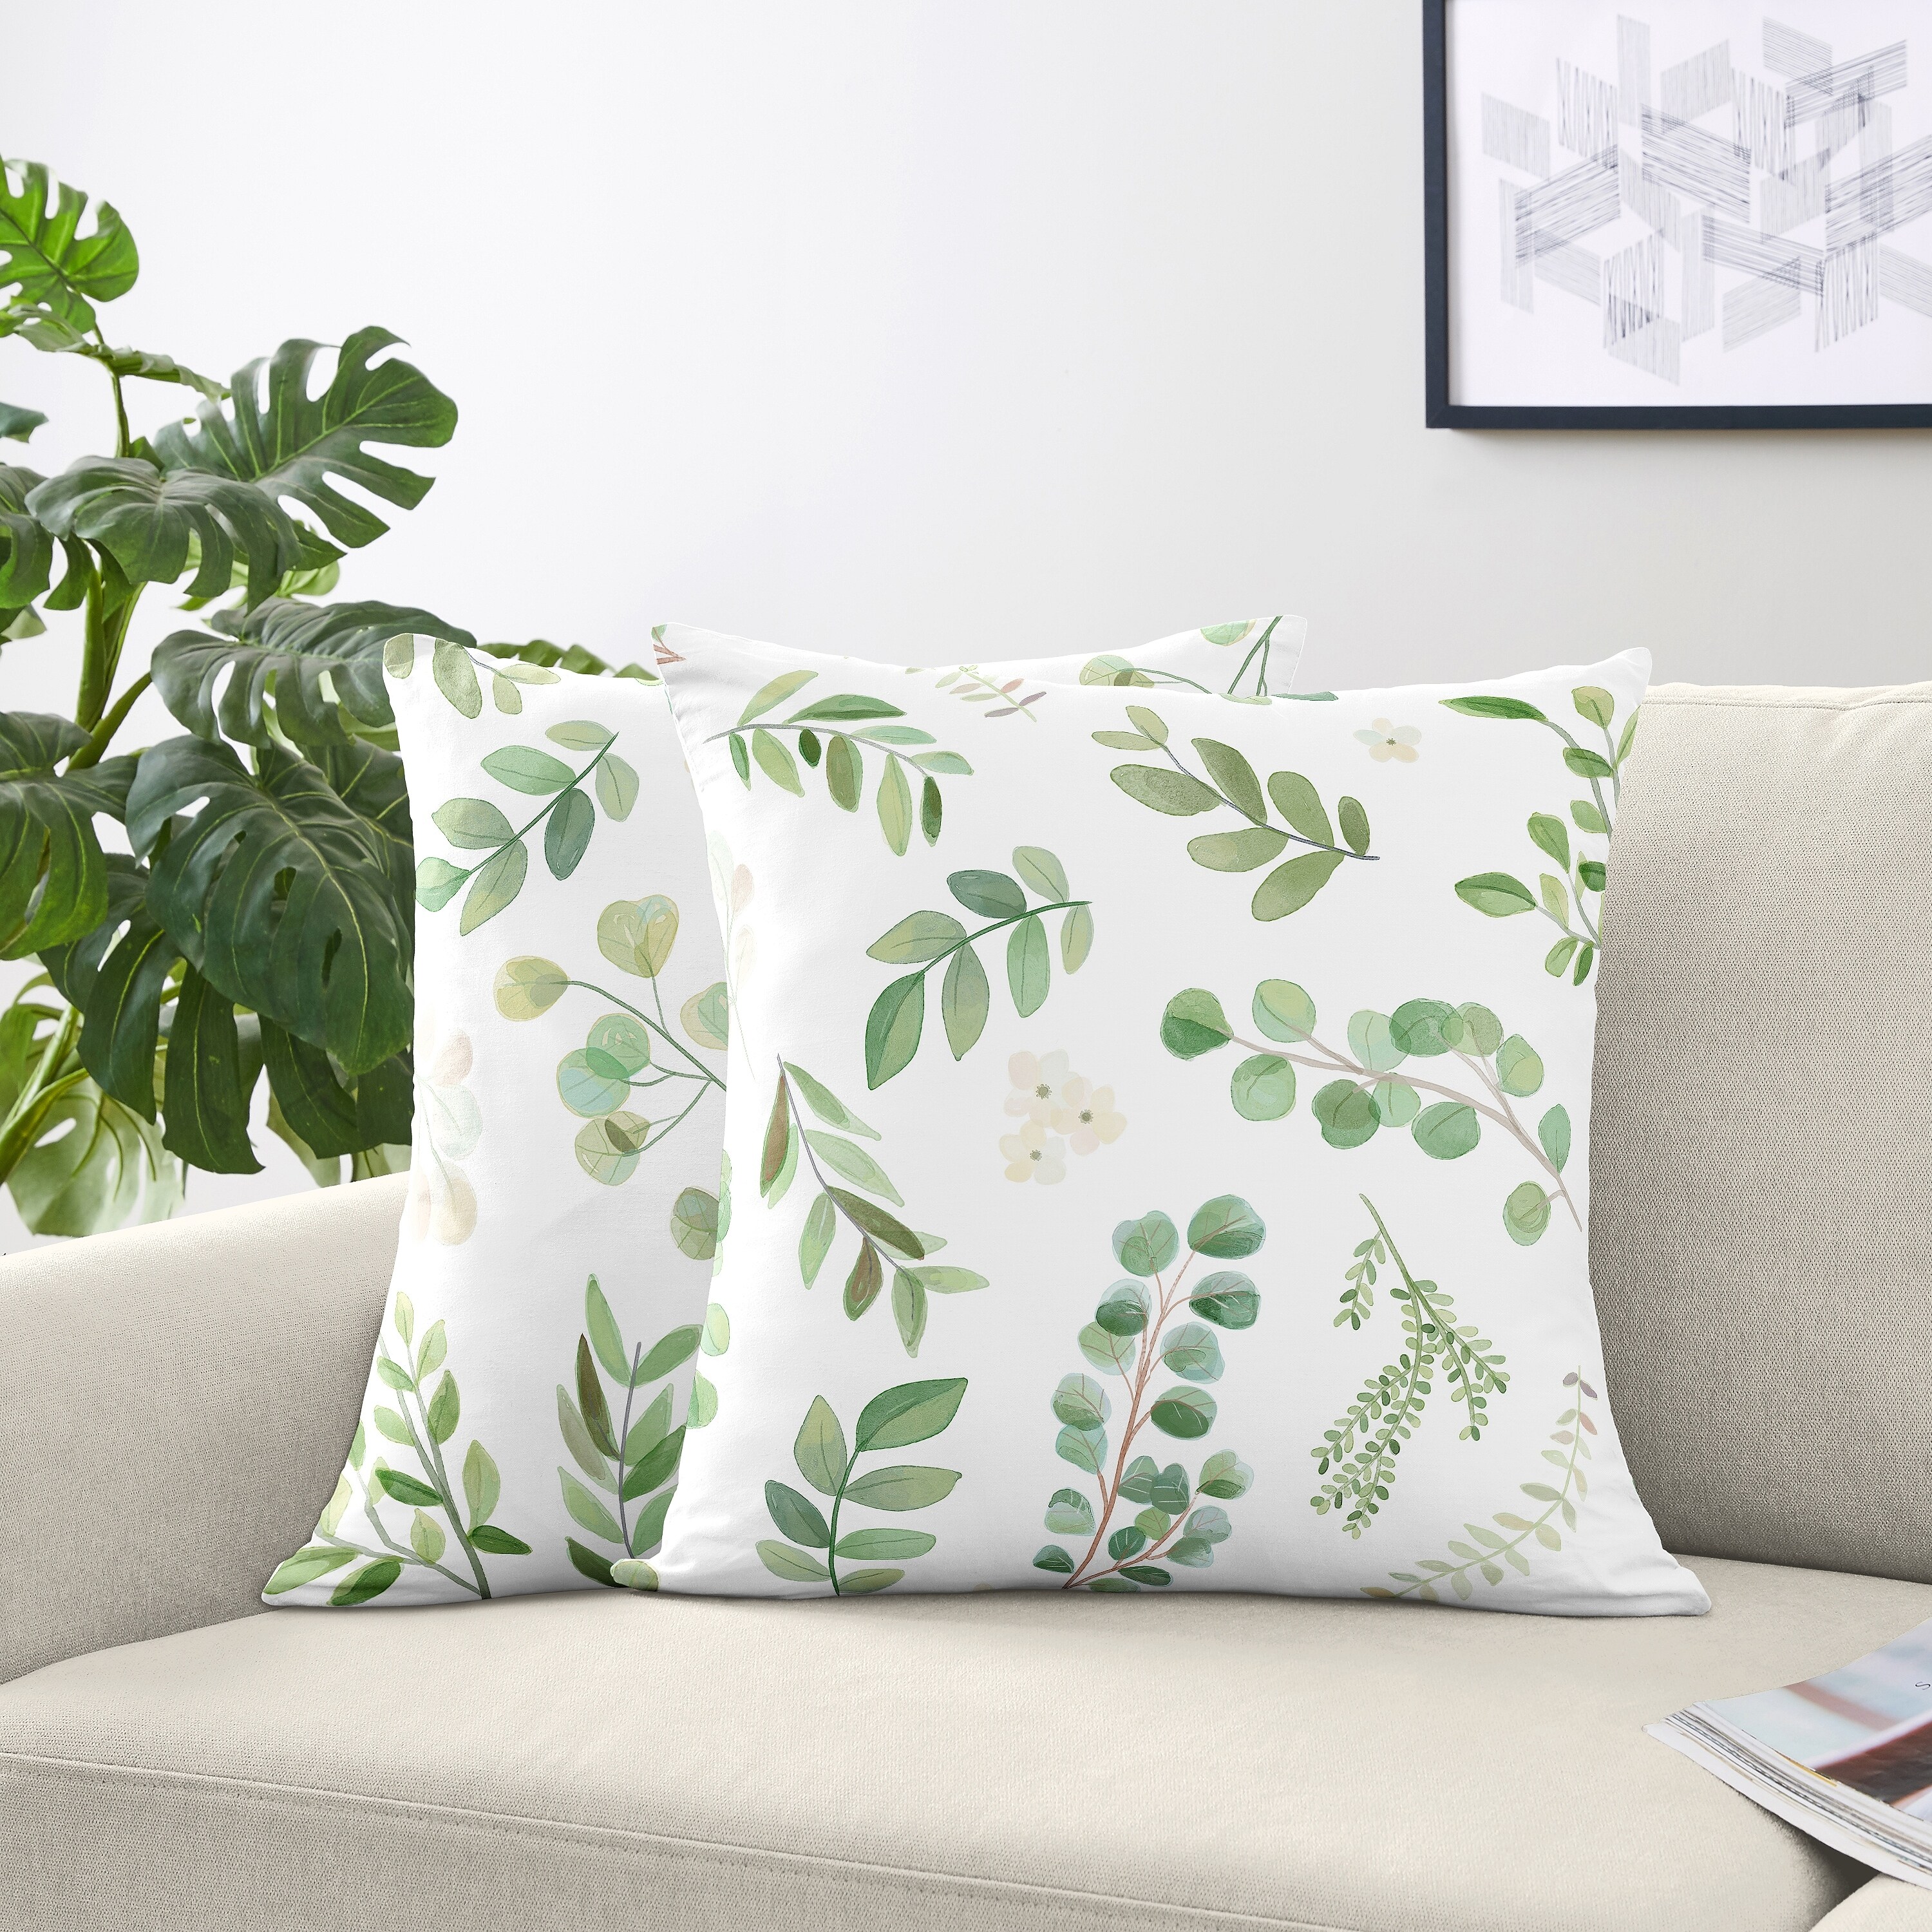 https://ak1.ostkcdn.com/images/products/is/images/direct/4fc6c55cac62738329063a550ae905a18d05c5db/Floral-Leaf-18-inch-Decorative-Accent-Throw-Pillows-%28Set-of-2%29---Green-White-Boho-Watercolor-Botanical-Woodland-Tropical-Garden.jpg